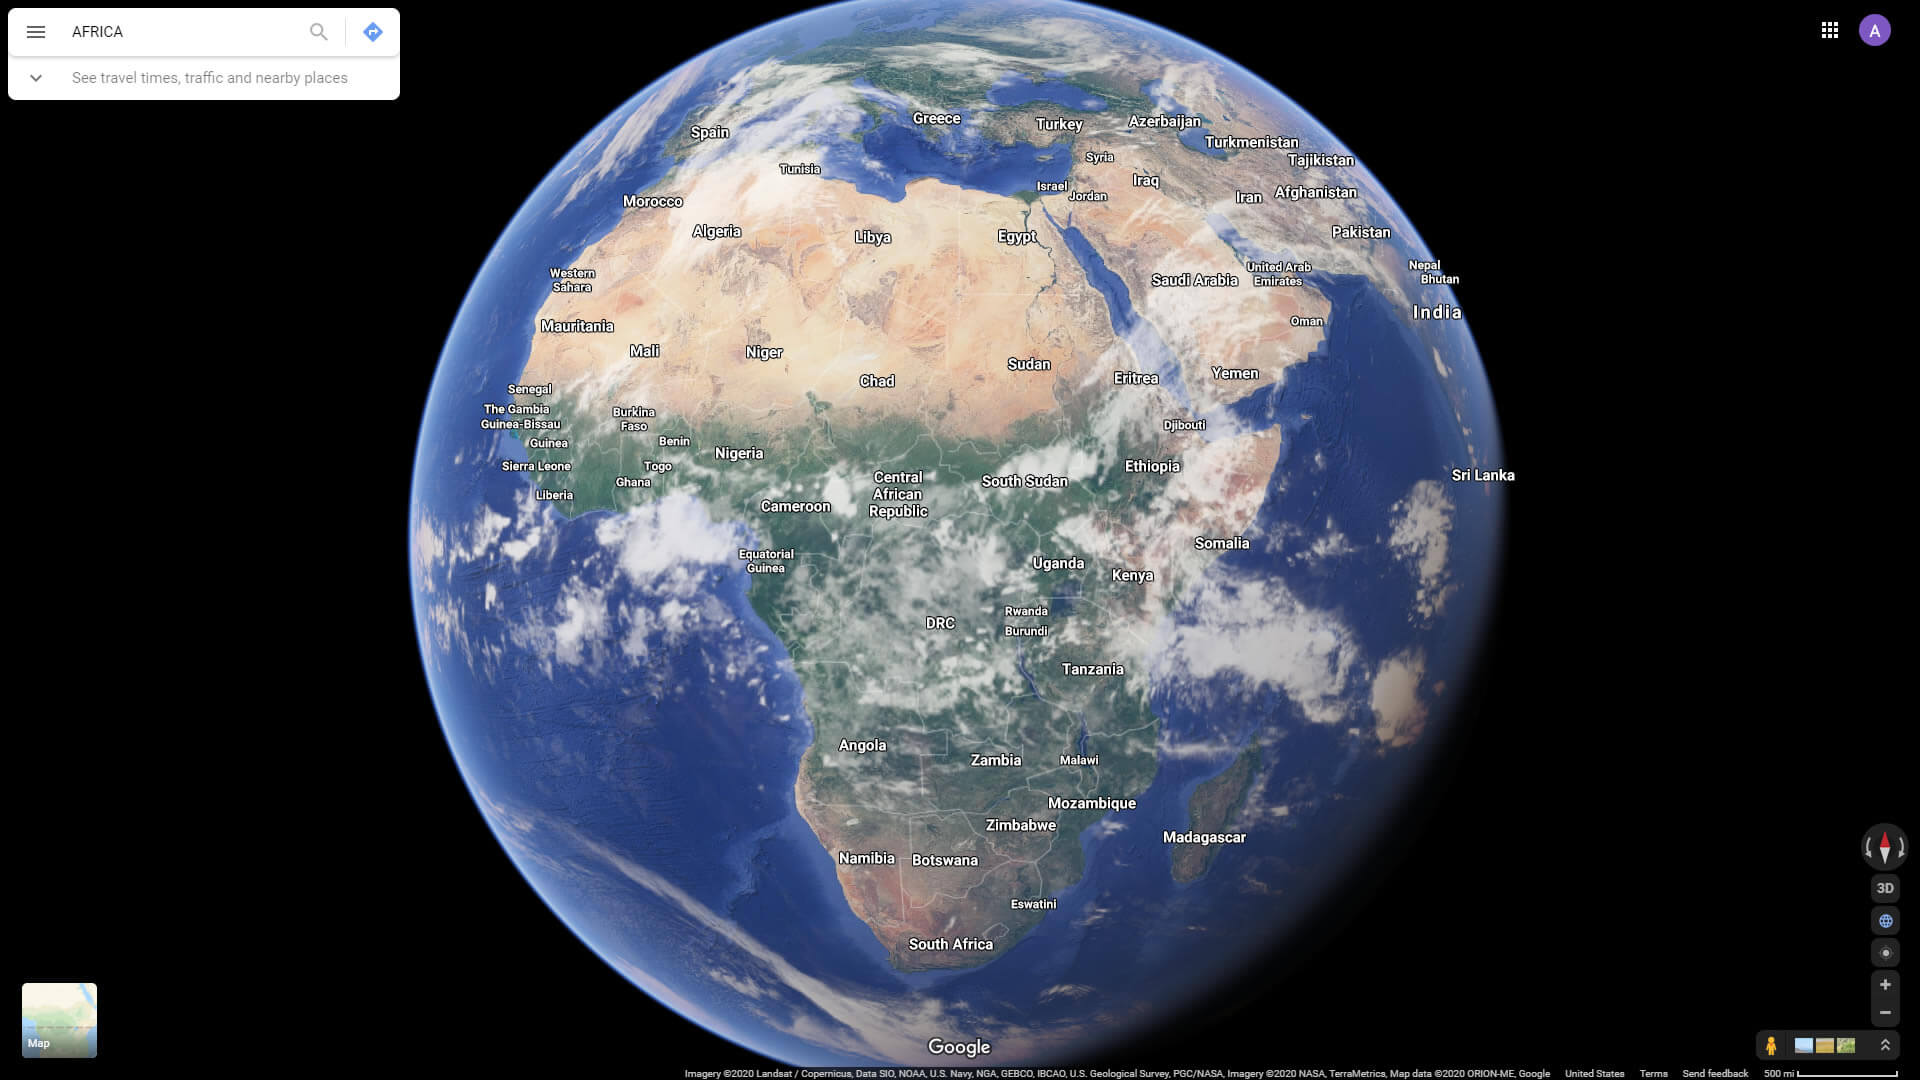 Africa Satellite View with Countries